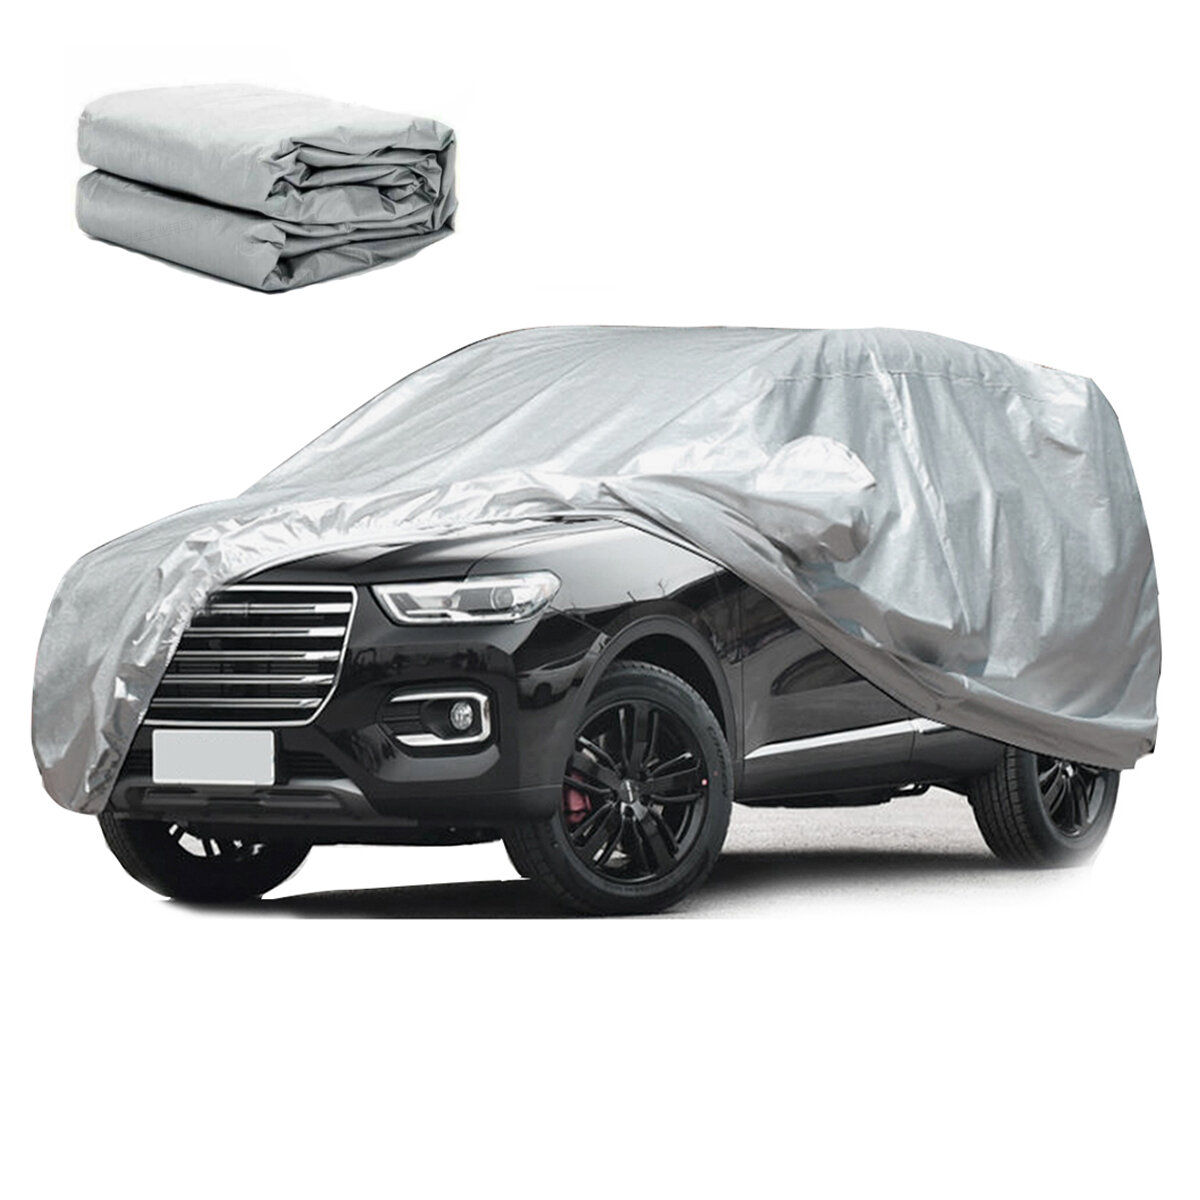 170t suv full car cover rain snow uv protection outdoor waterproof breathable